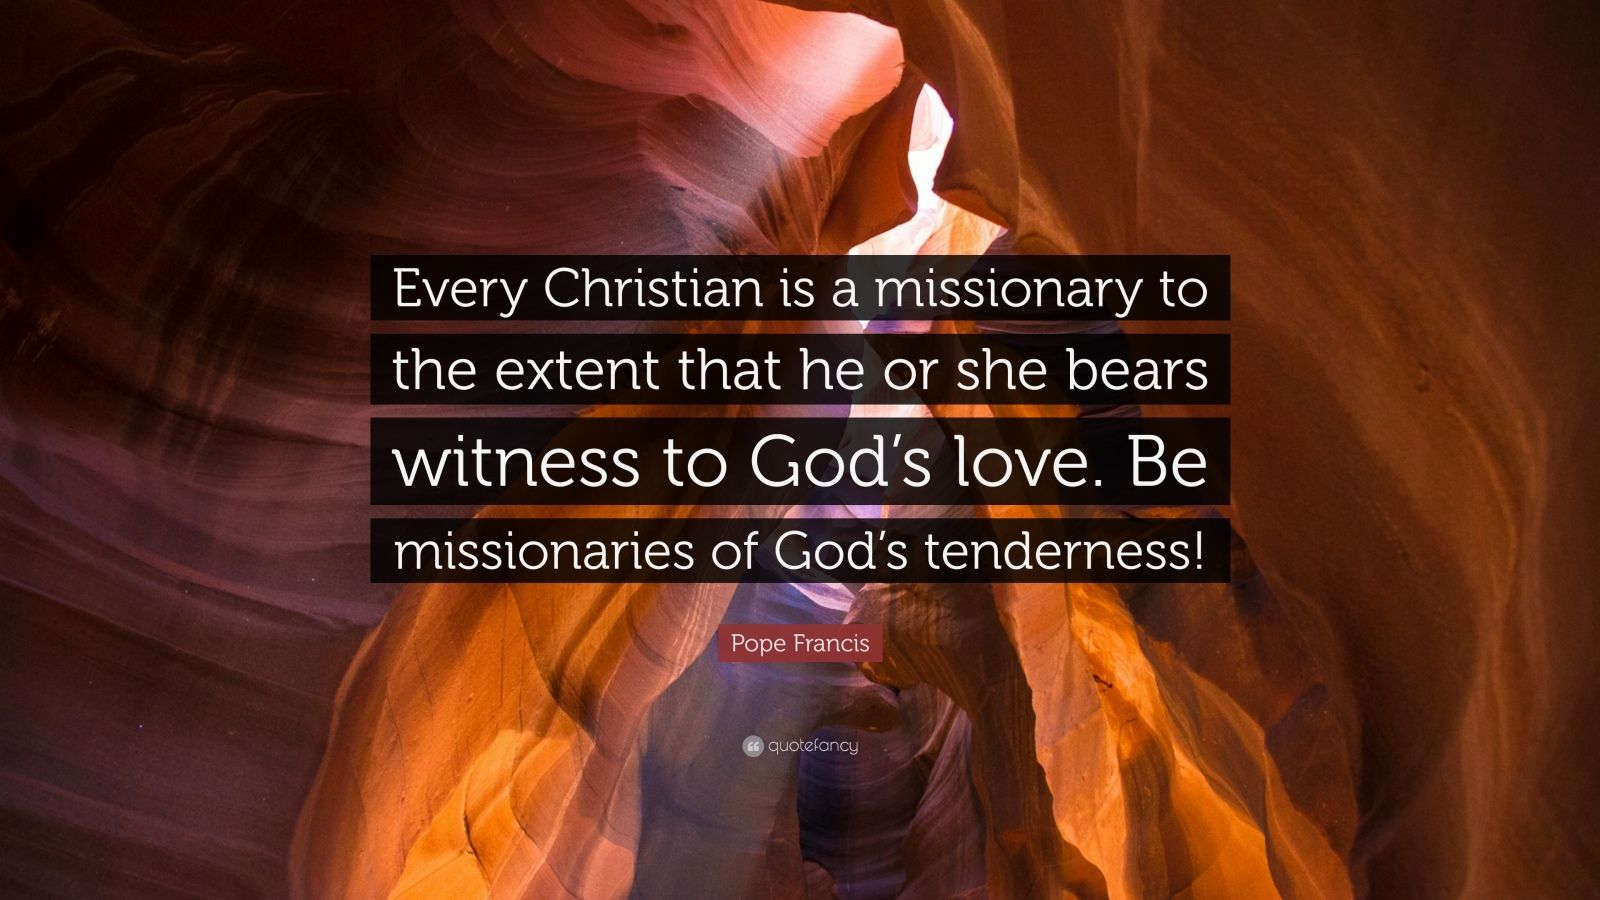 Pope Francis Quote “every Christian Is A Missionary To The Extent That He Or She Bears Witness